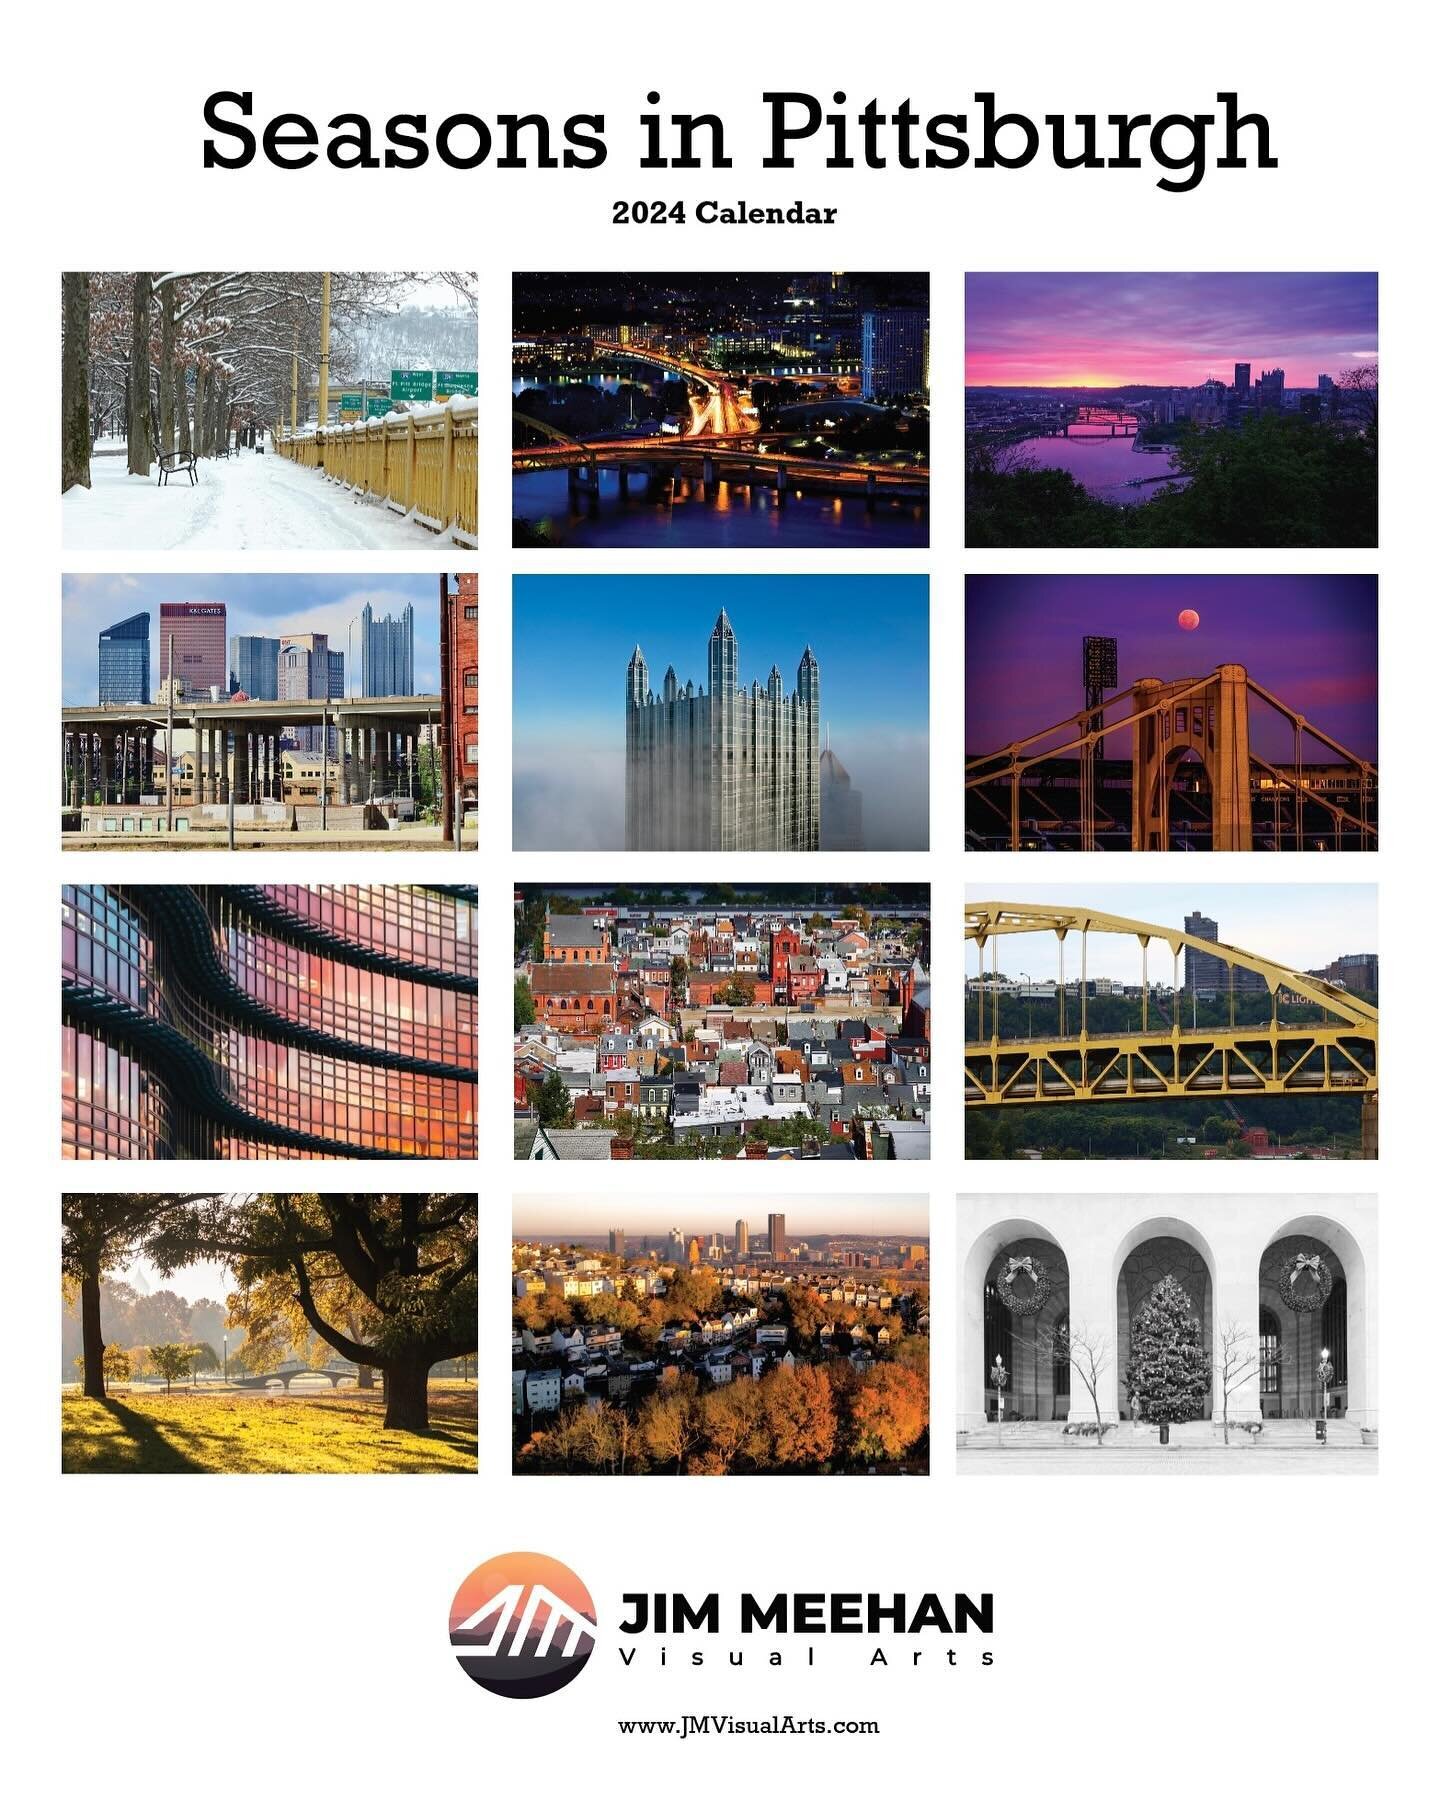 My 2024 Calendar &ldquo;Seasons in Pittsburgh&rdquo; is now available in limited quantities. Cost is $30 + shipping. For those that would like to purchase, please visit the link in my bio. 
Thanks.
-Jim